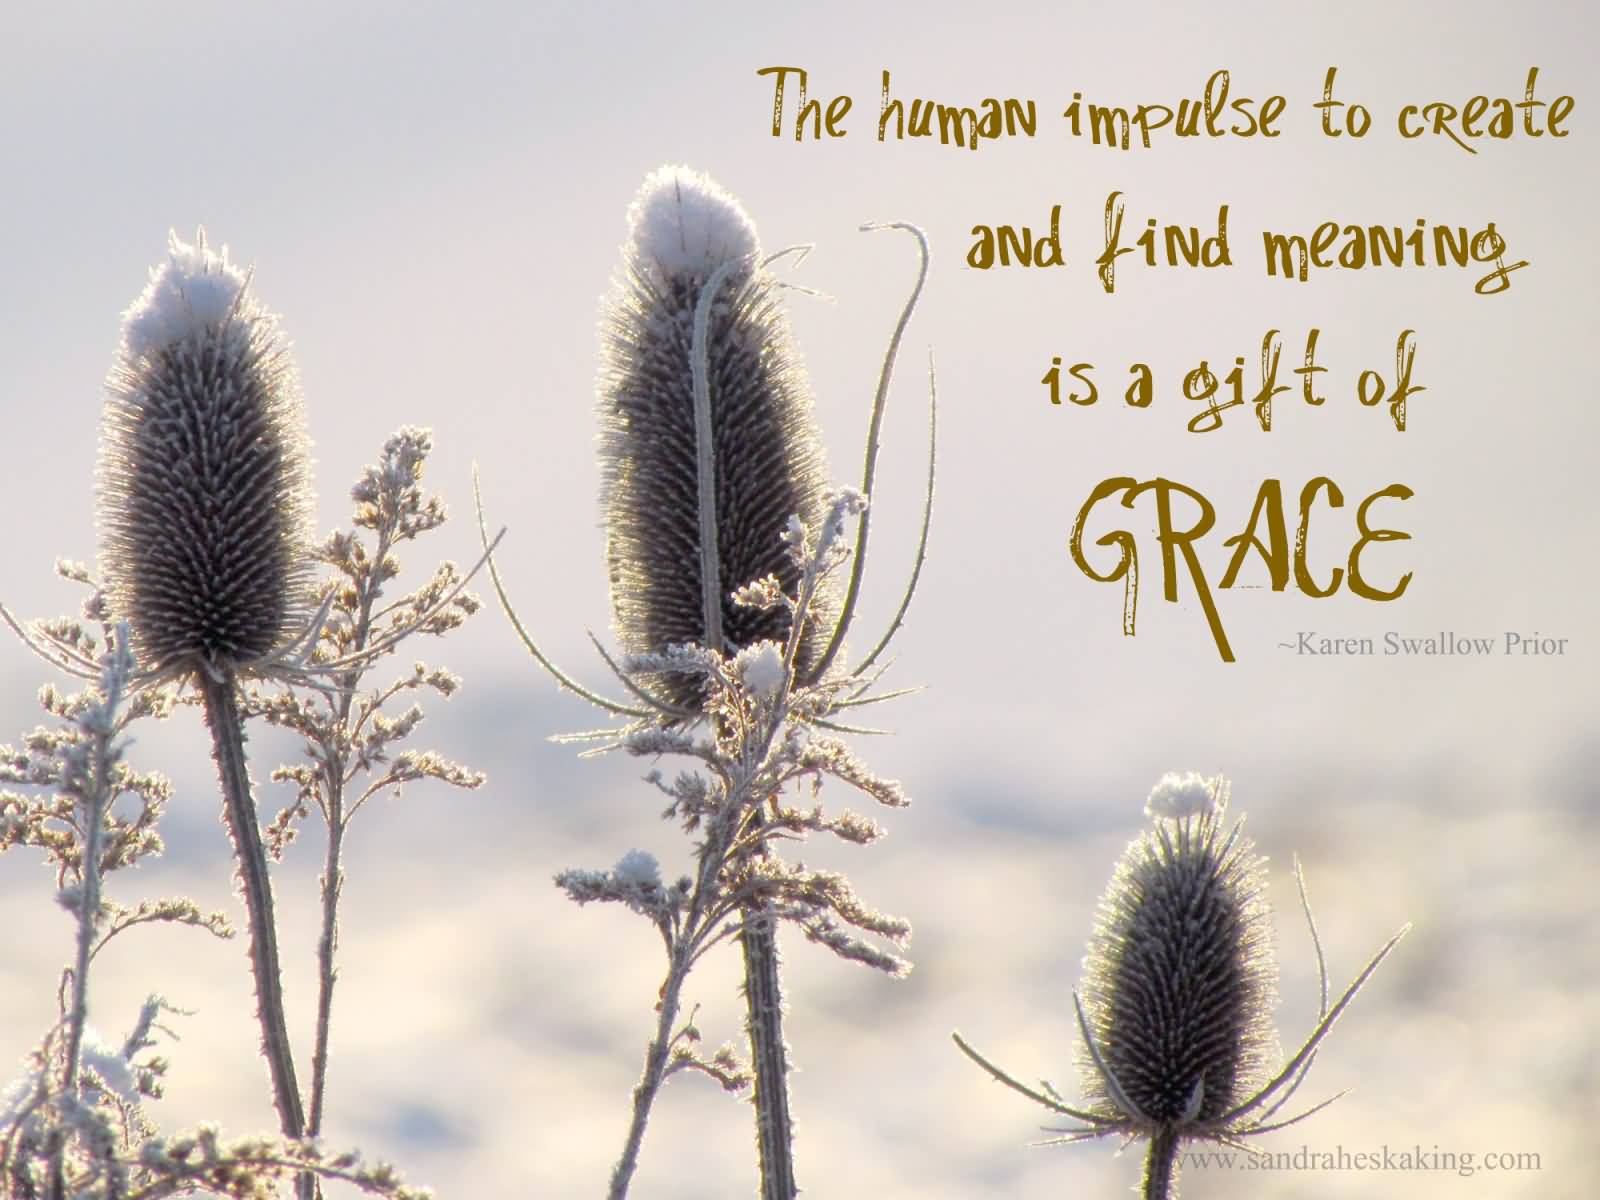 The human impulse to create and find meaning is a gift of grace. Karen Swallow Prior